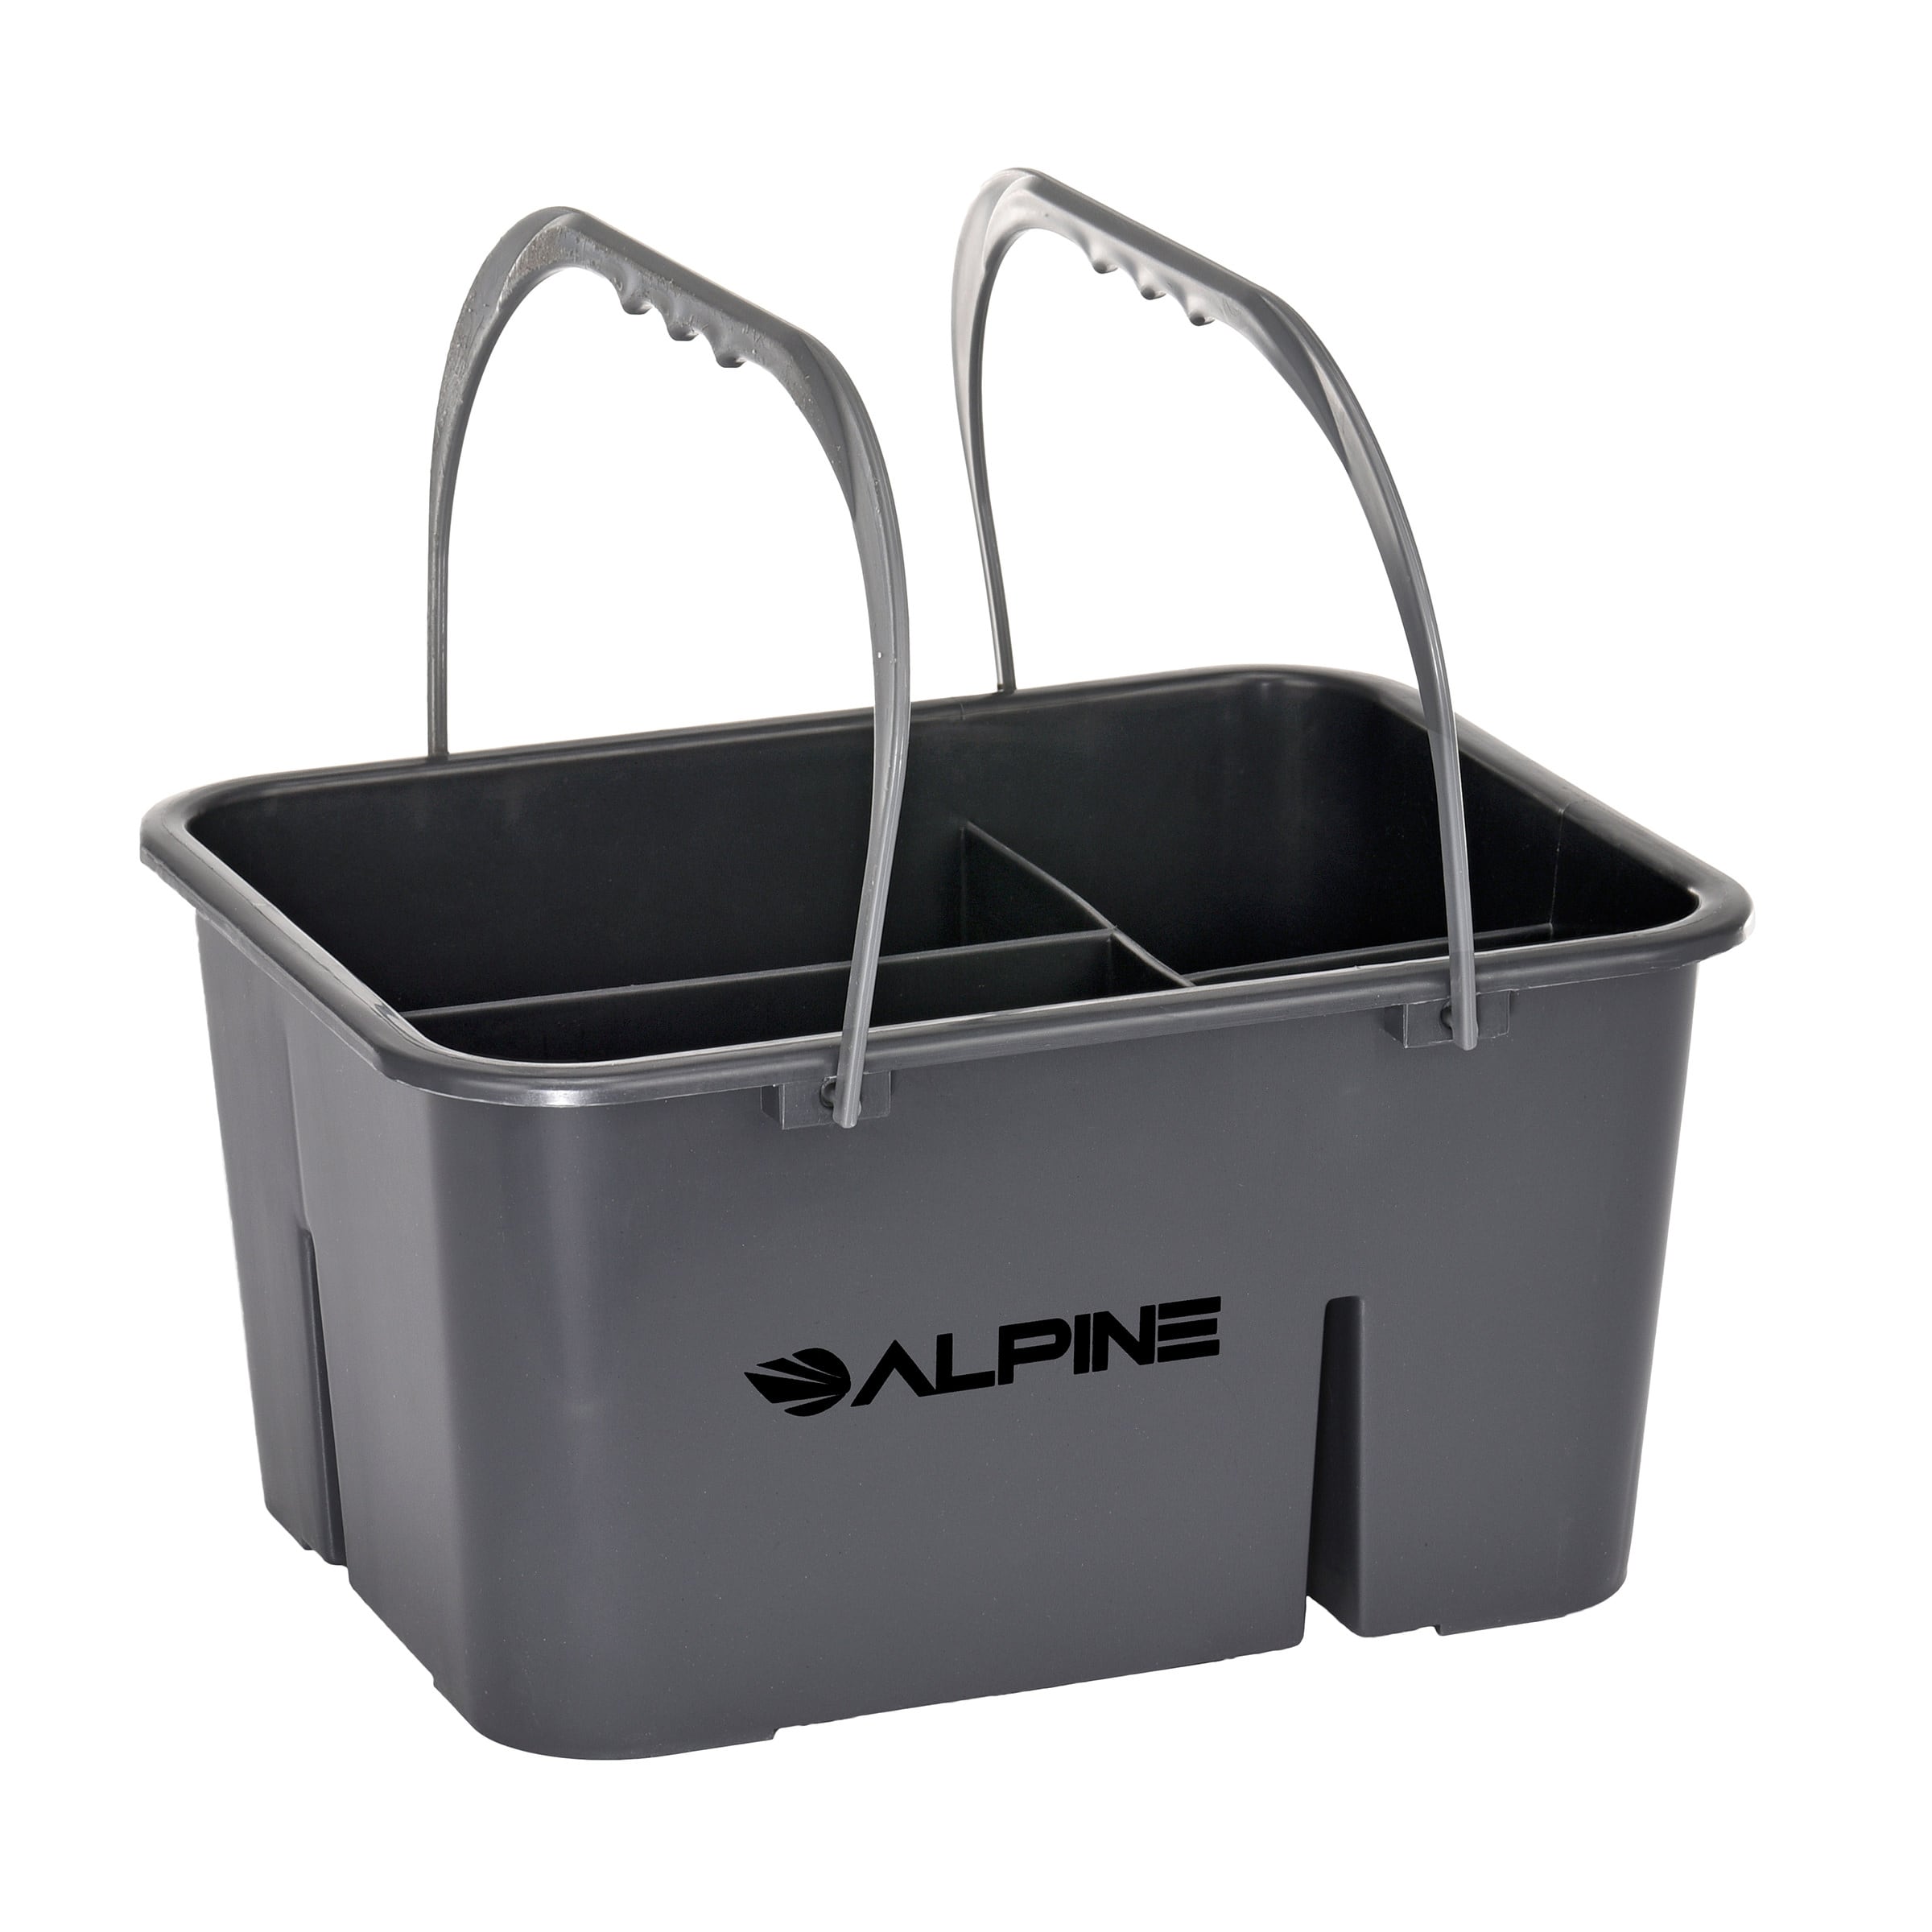 Heavy Duty Divided Cleaner & Tools Bucket for Sanitizing Commercial Bathroom Floors & Windows Alpine Industries 4-Compartment Plastic Cleaning Caddy 